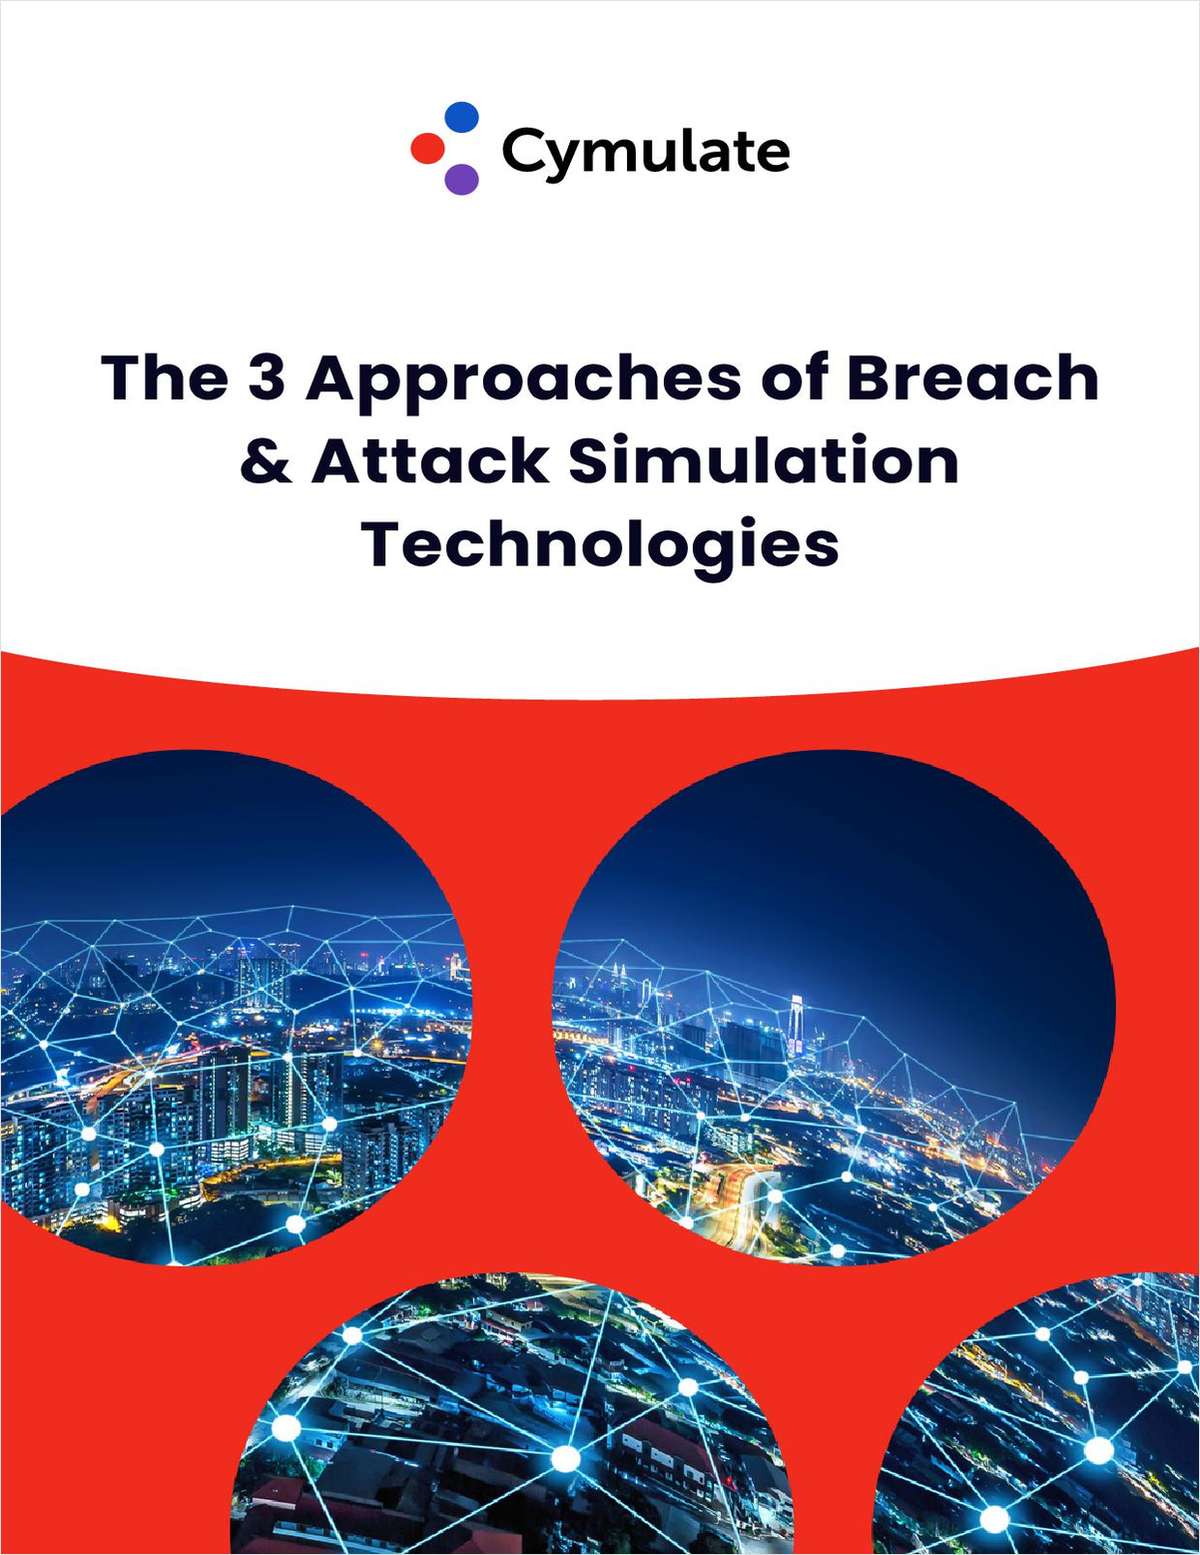 The 3 Approaches to Breach & Attack Simulation Technologies.